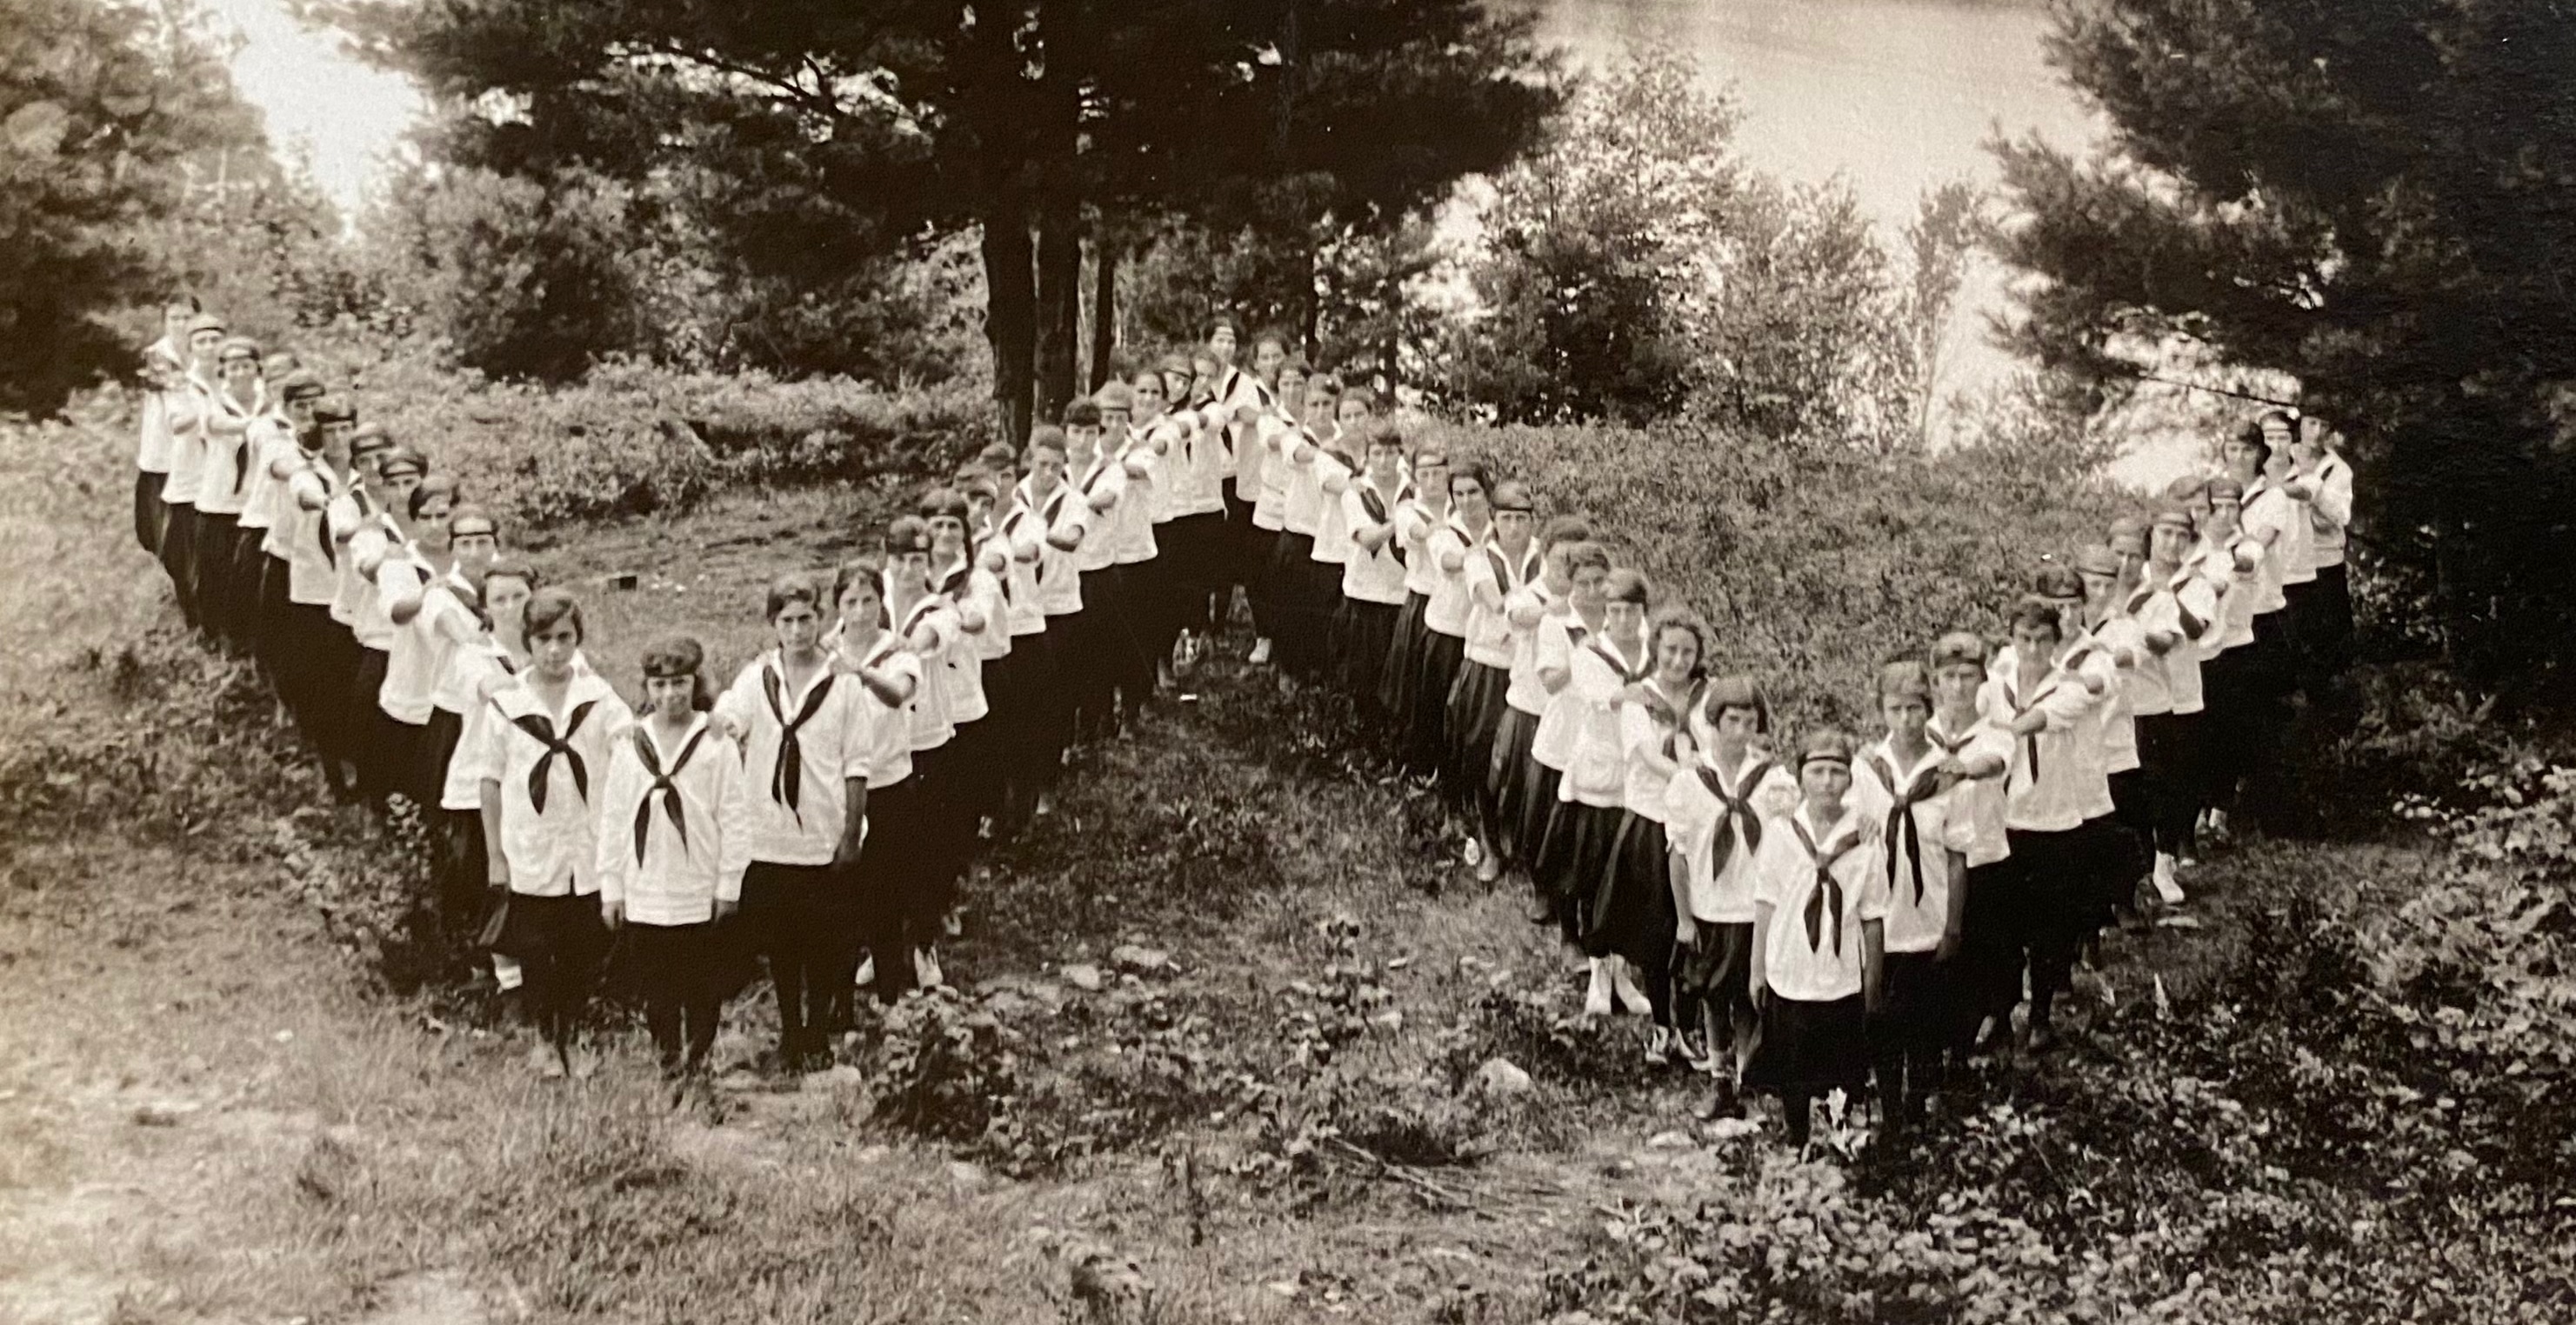 Vintage photo of campers lining up in shape of letter W.